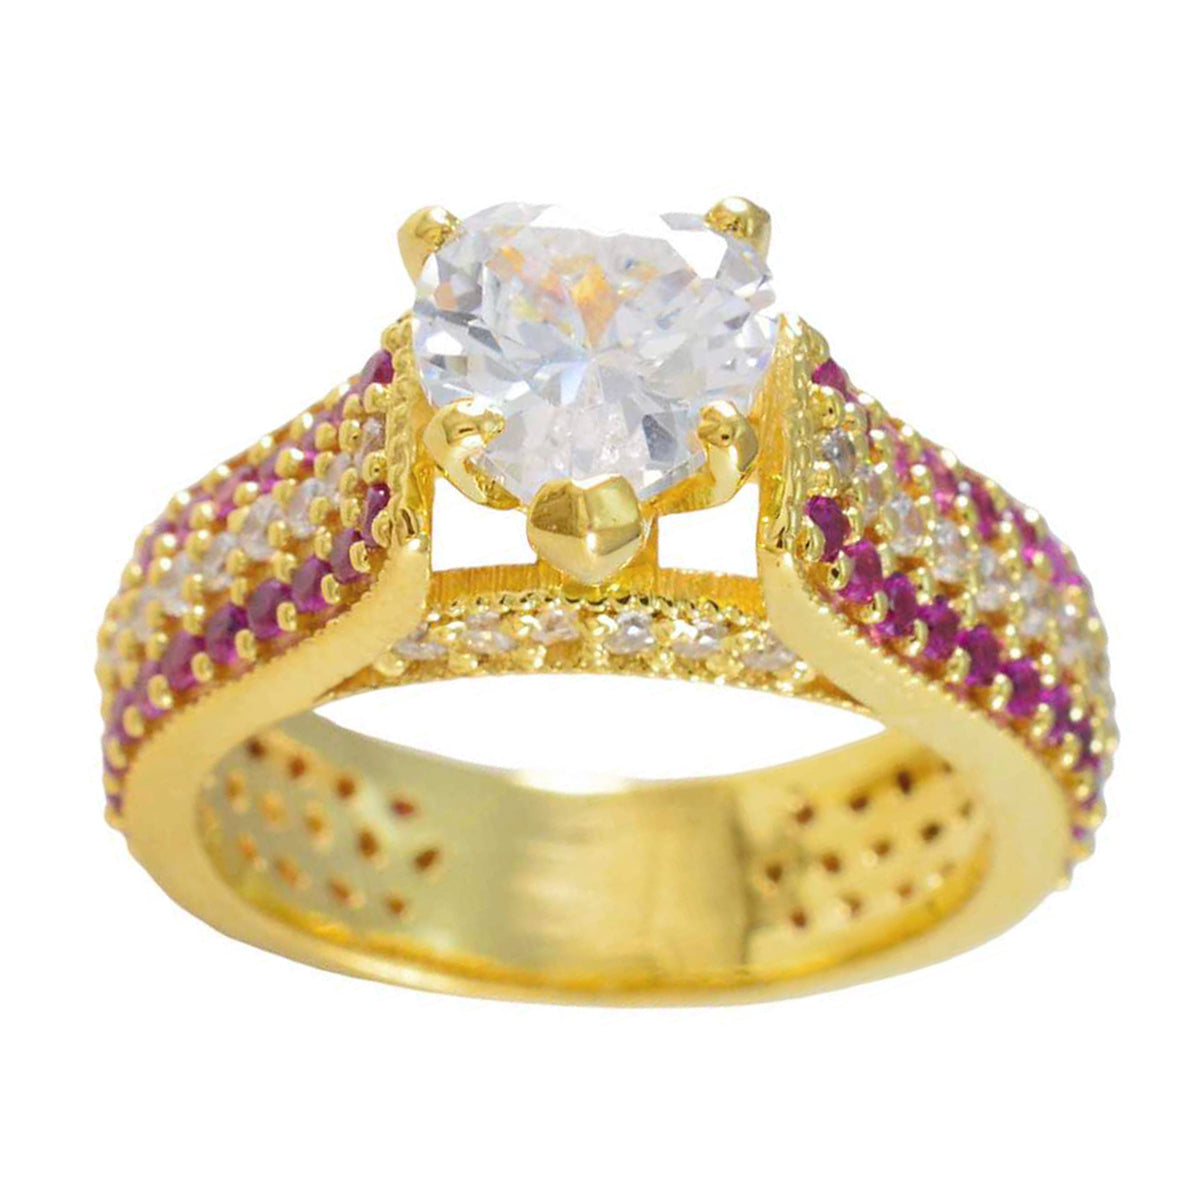 Riyo Designer Silver Ring With Yellow Gold Plating Ruby CZ Stone Round Shape Prong Setting Ring